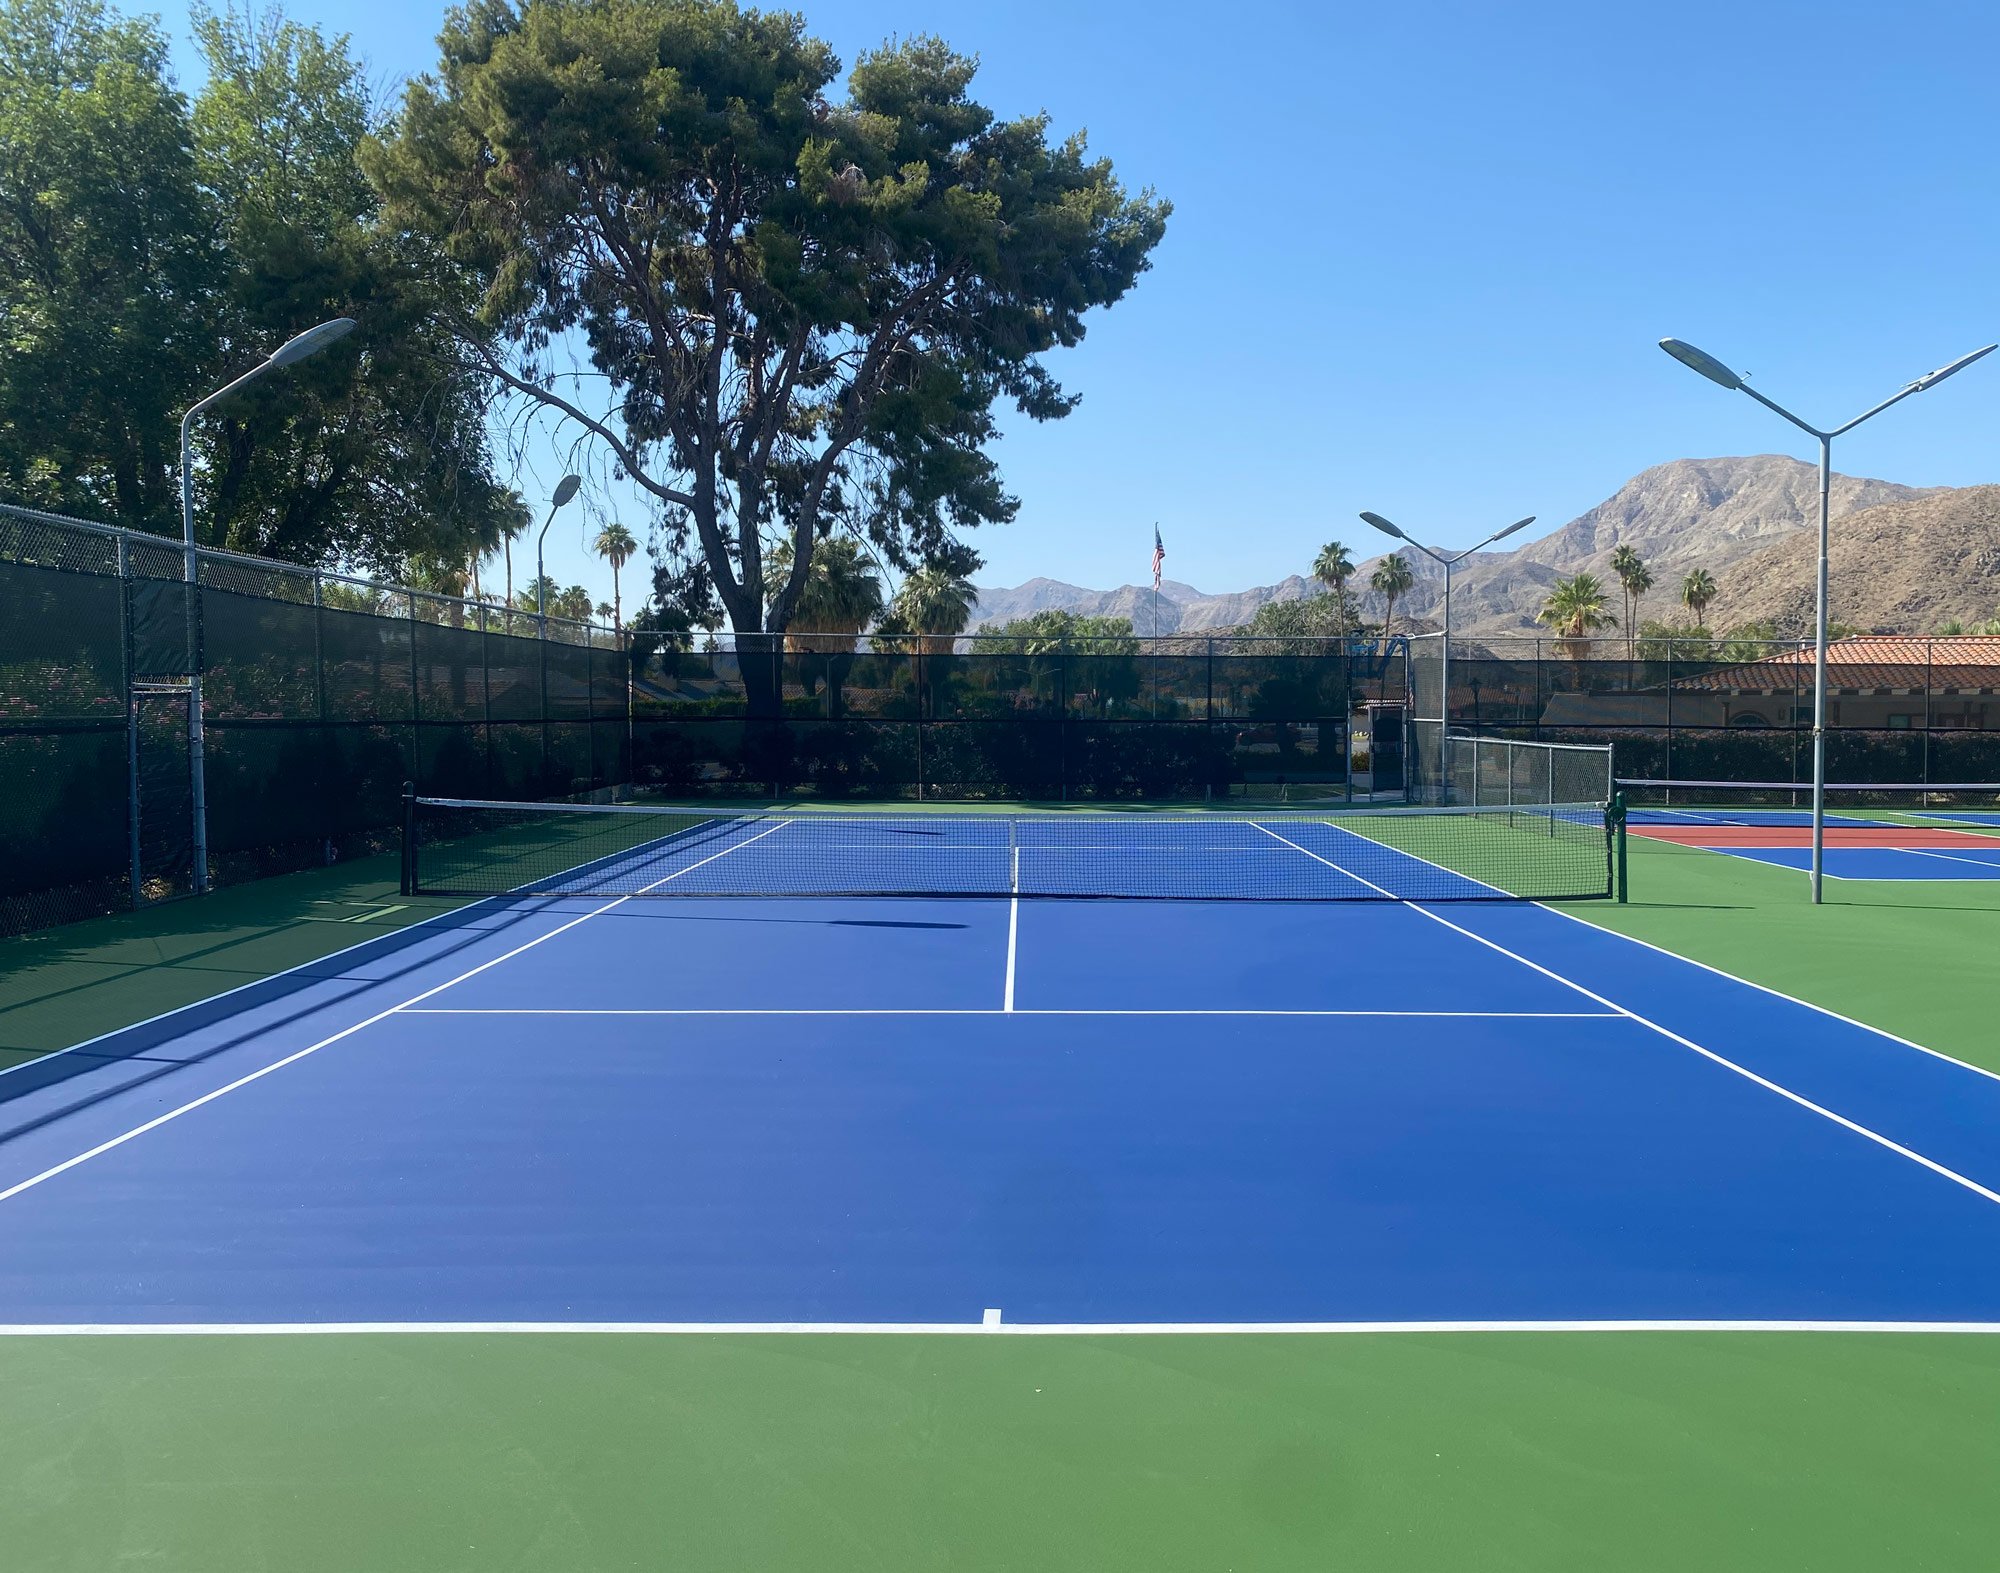  Windscreens surround a multi-court area including tennis court with a blue playing surface surrounded by green surface. It is in a Southern California desert setting. 